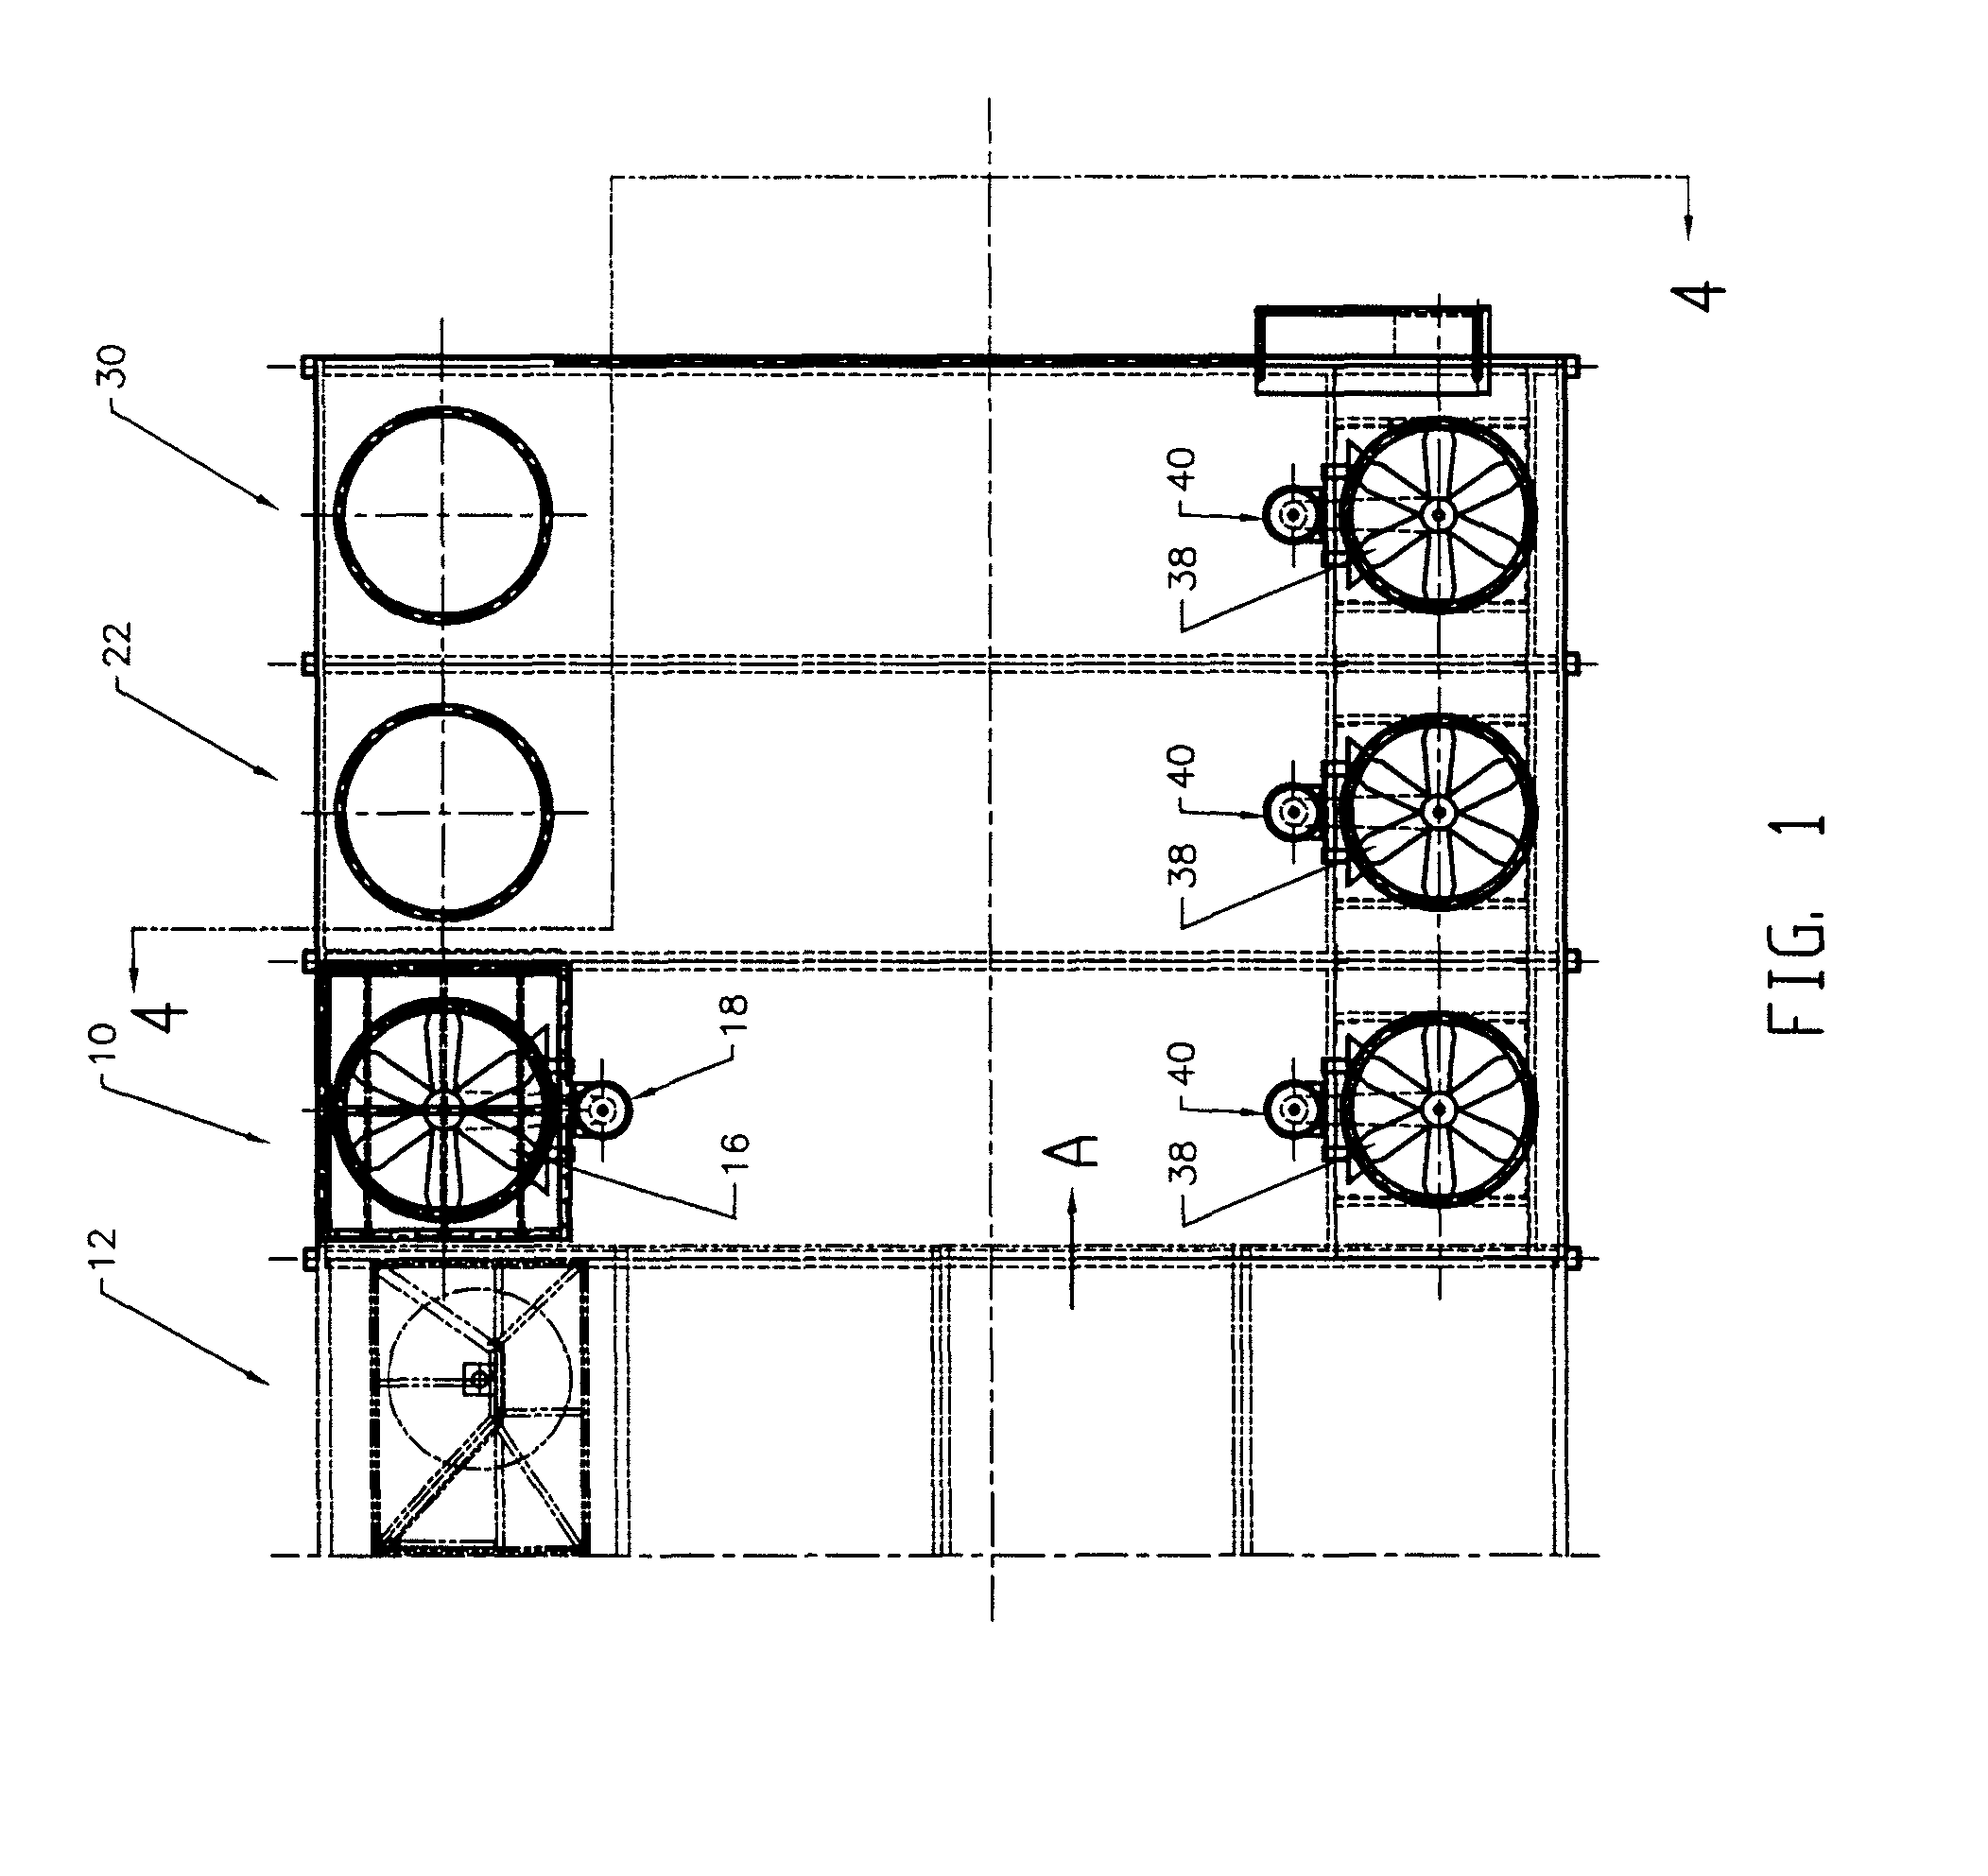 Method and apparatus for controlling cooling temperature and pressure in wood veneer jet dryers